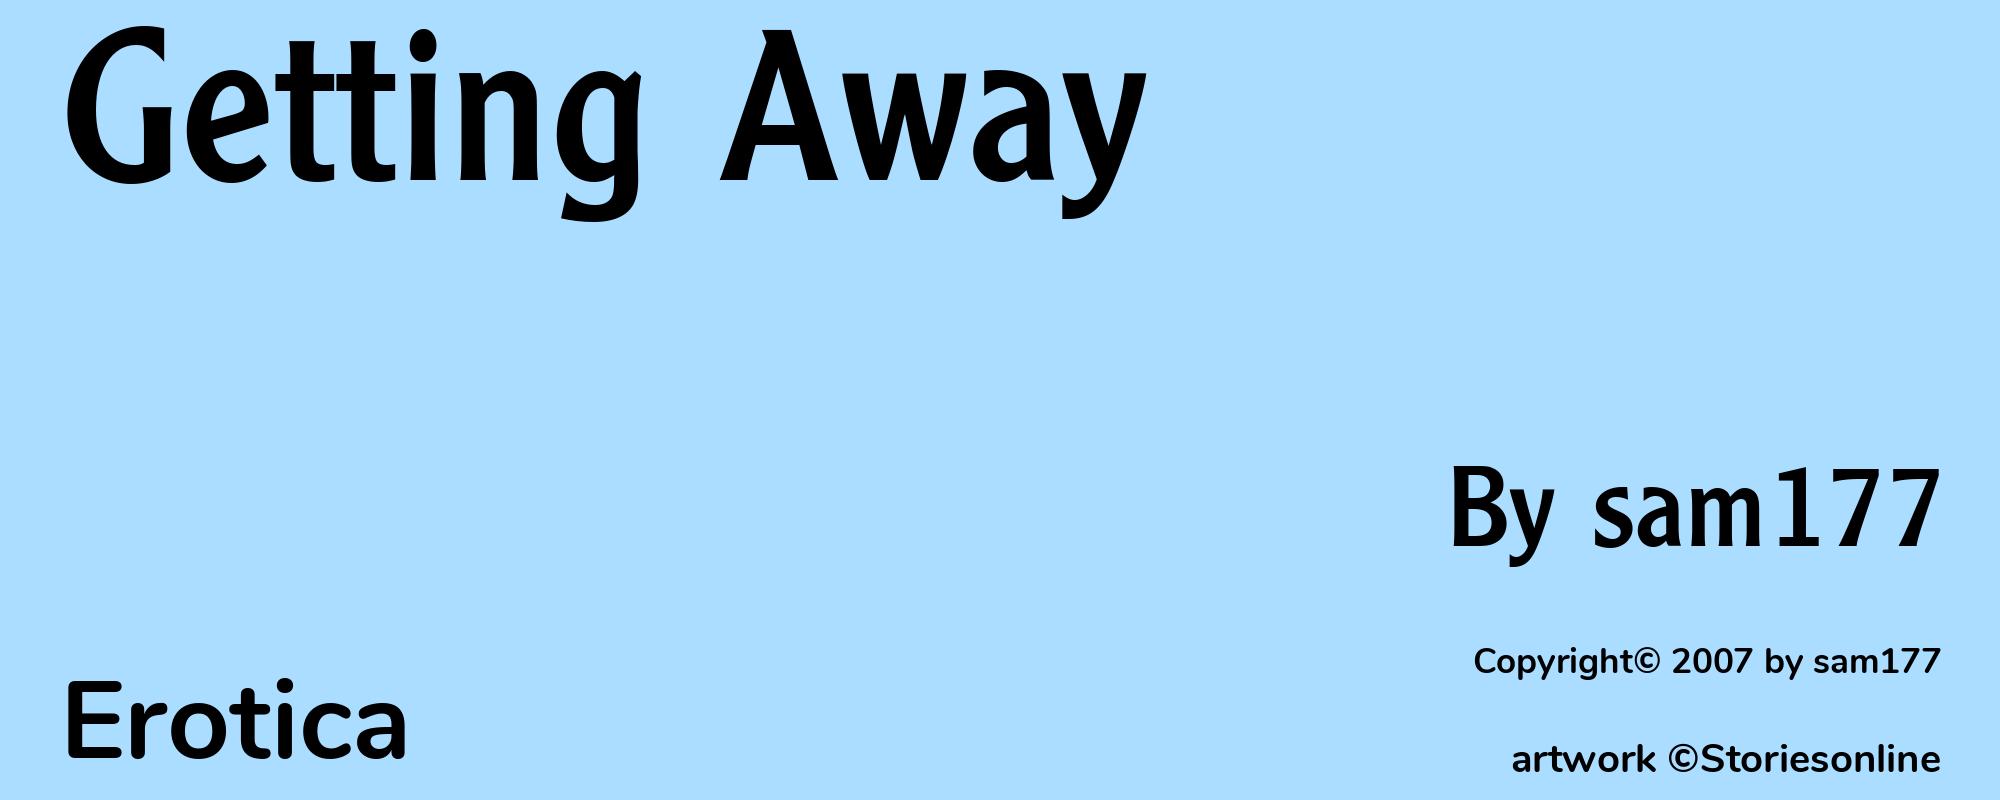 Getting Away - Cover